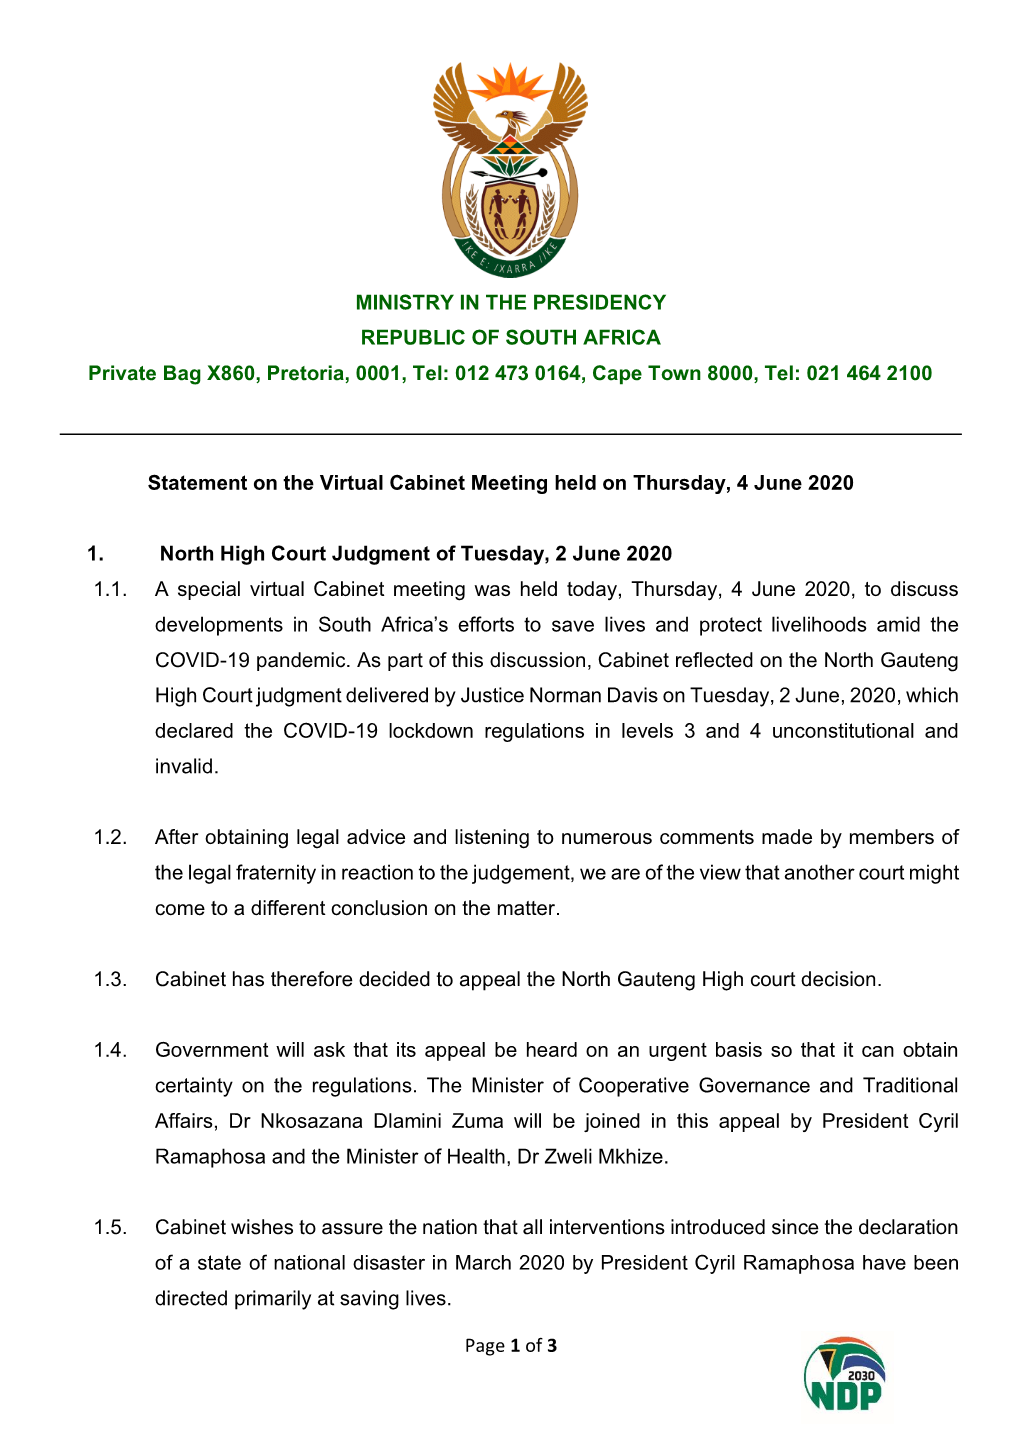 Statement on the Virtual Cabinet Meeting Held on Thursday, 4 June 2020